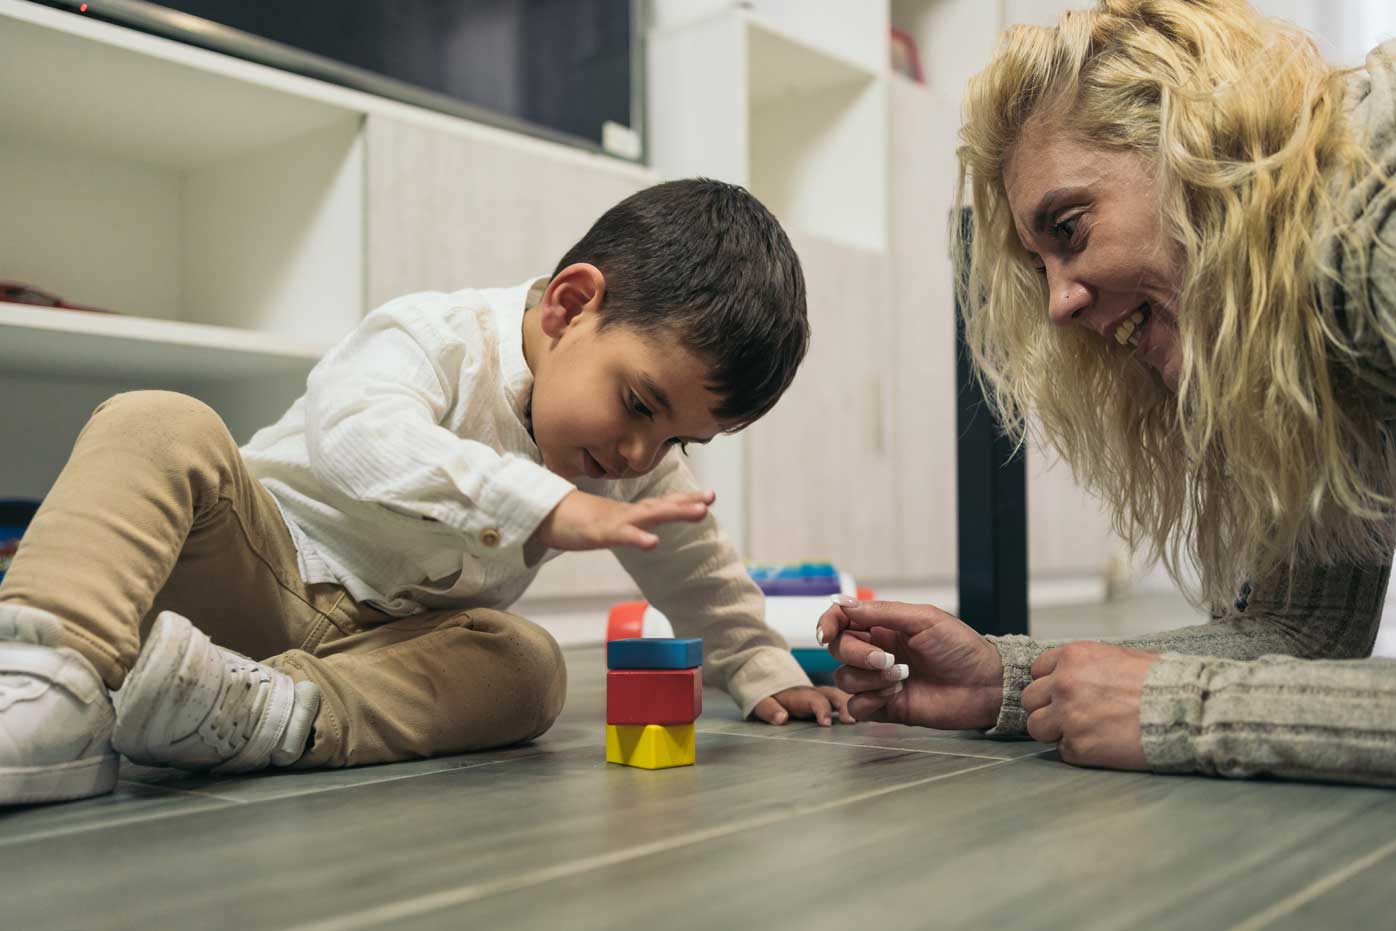 A young child plays with blocks beside his mother